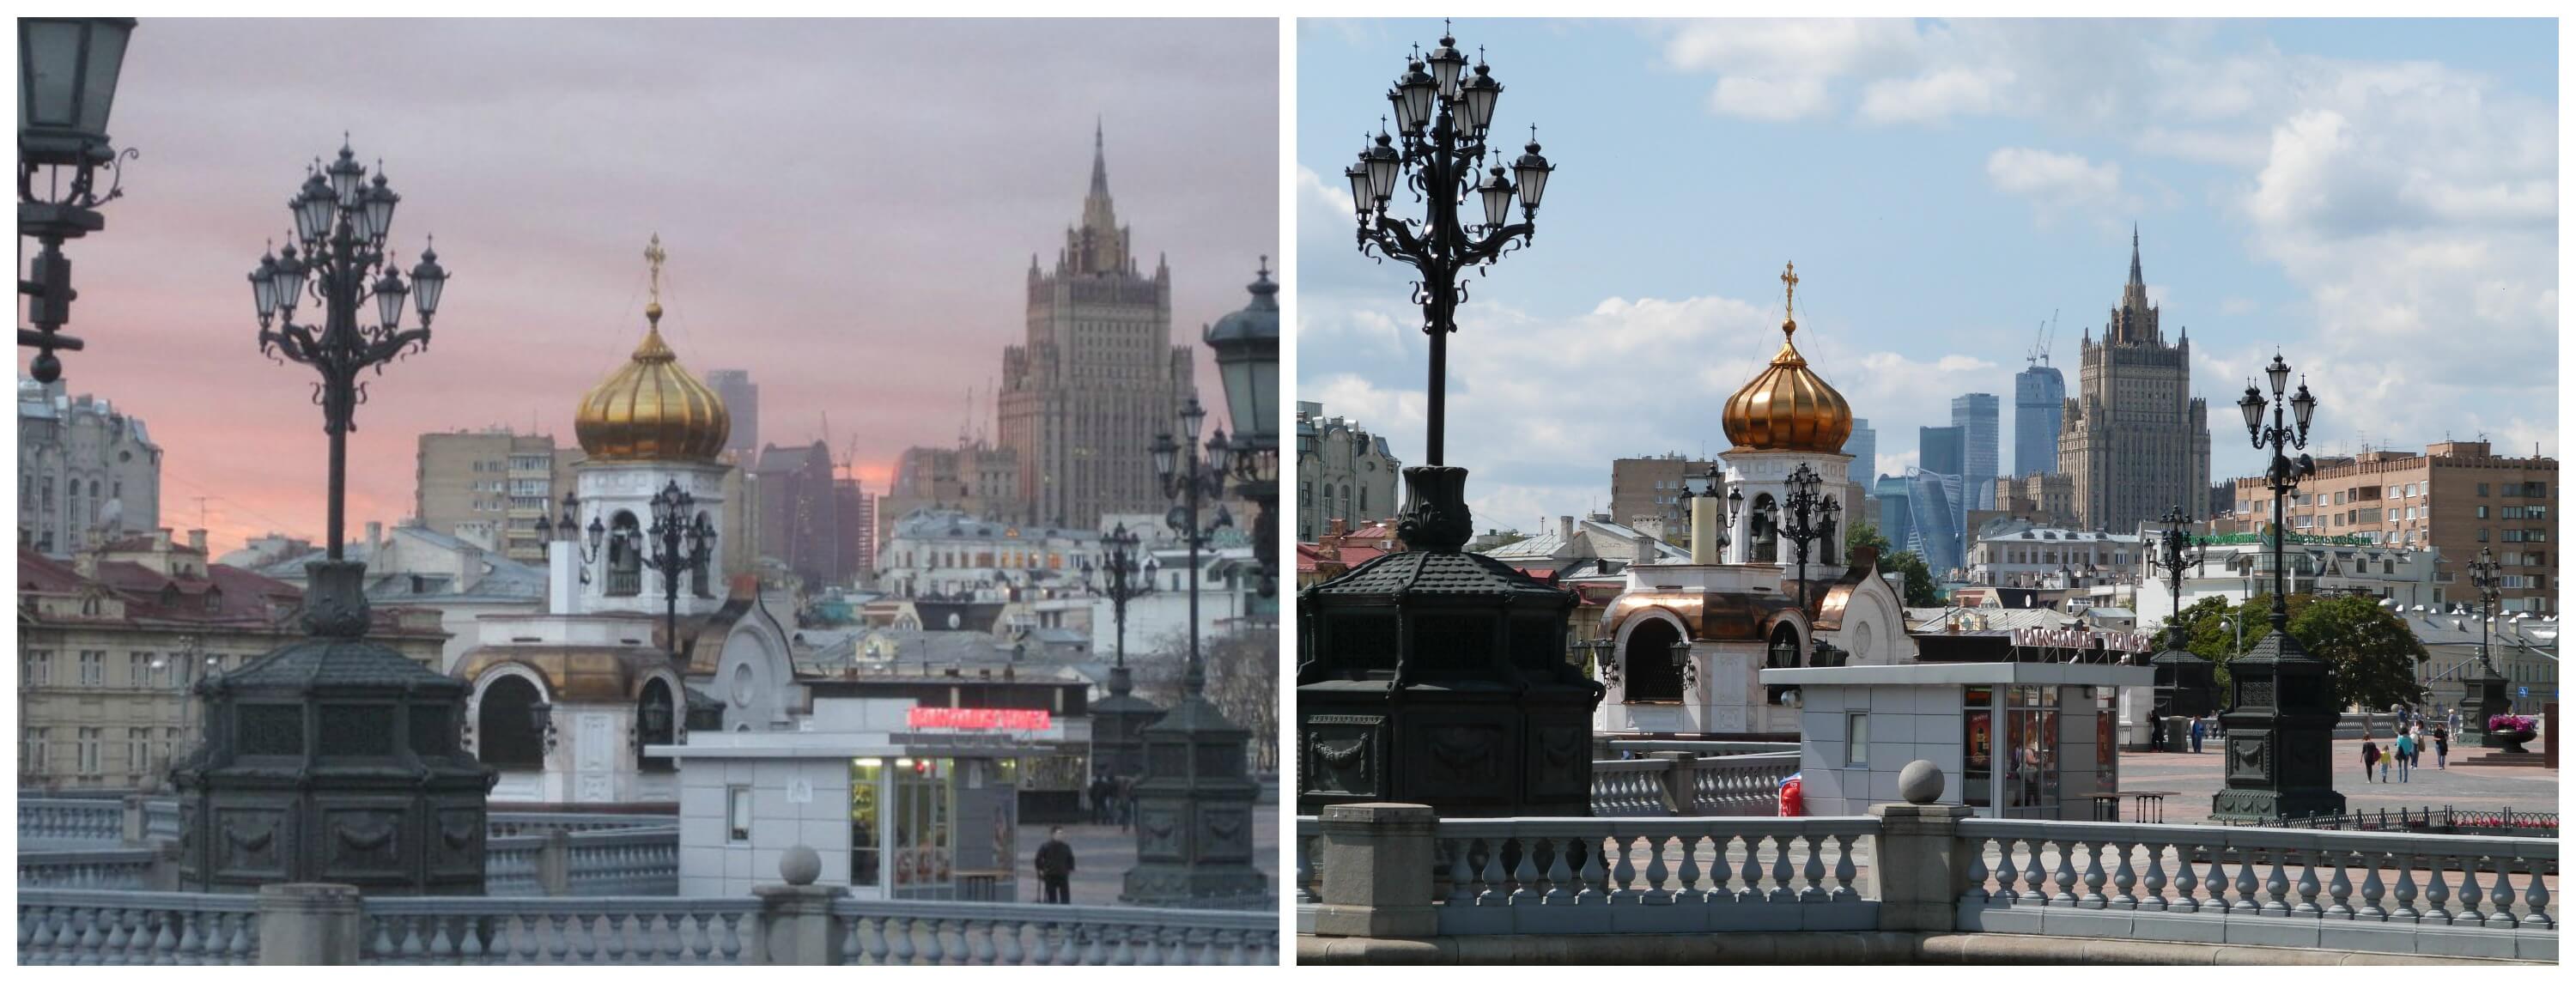 Moscow: then and now